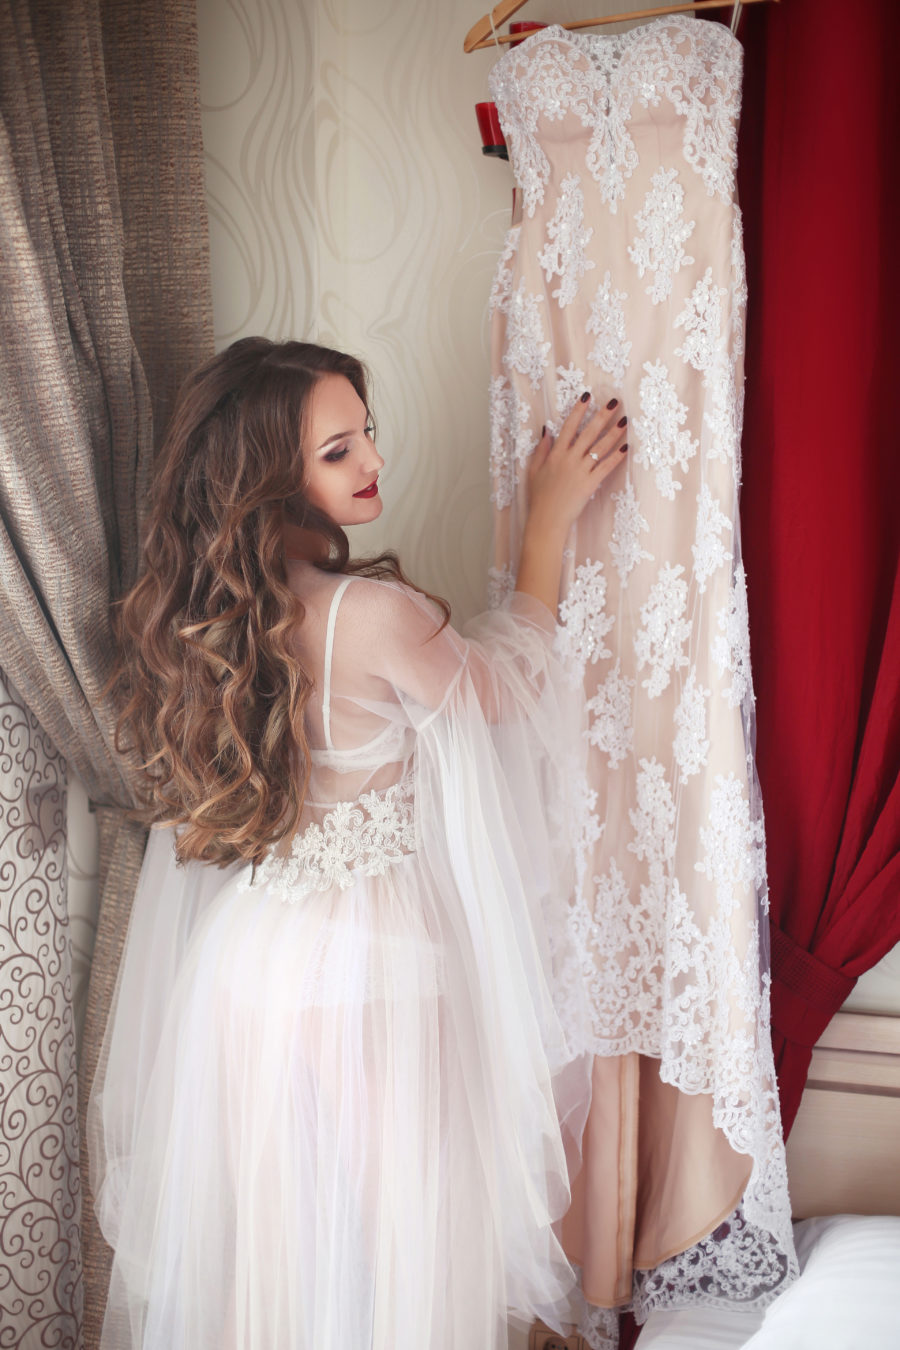 care-wedding-dress-before-during-after-big-day